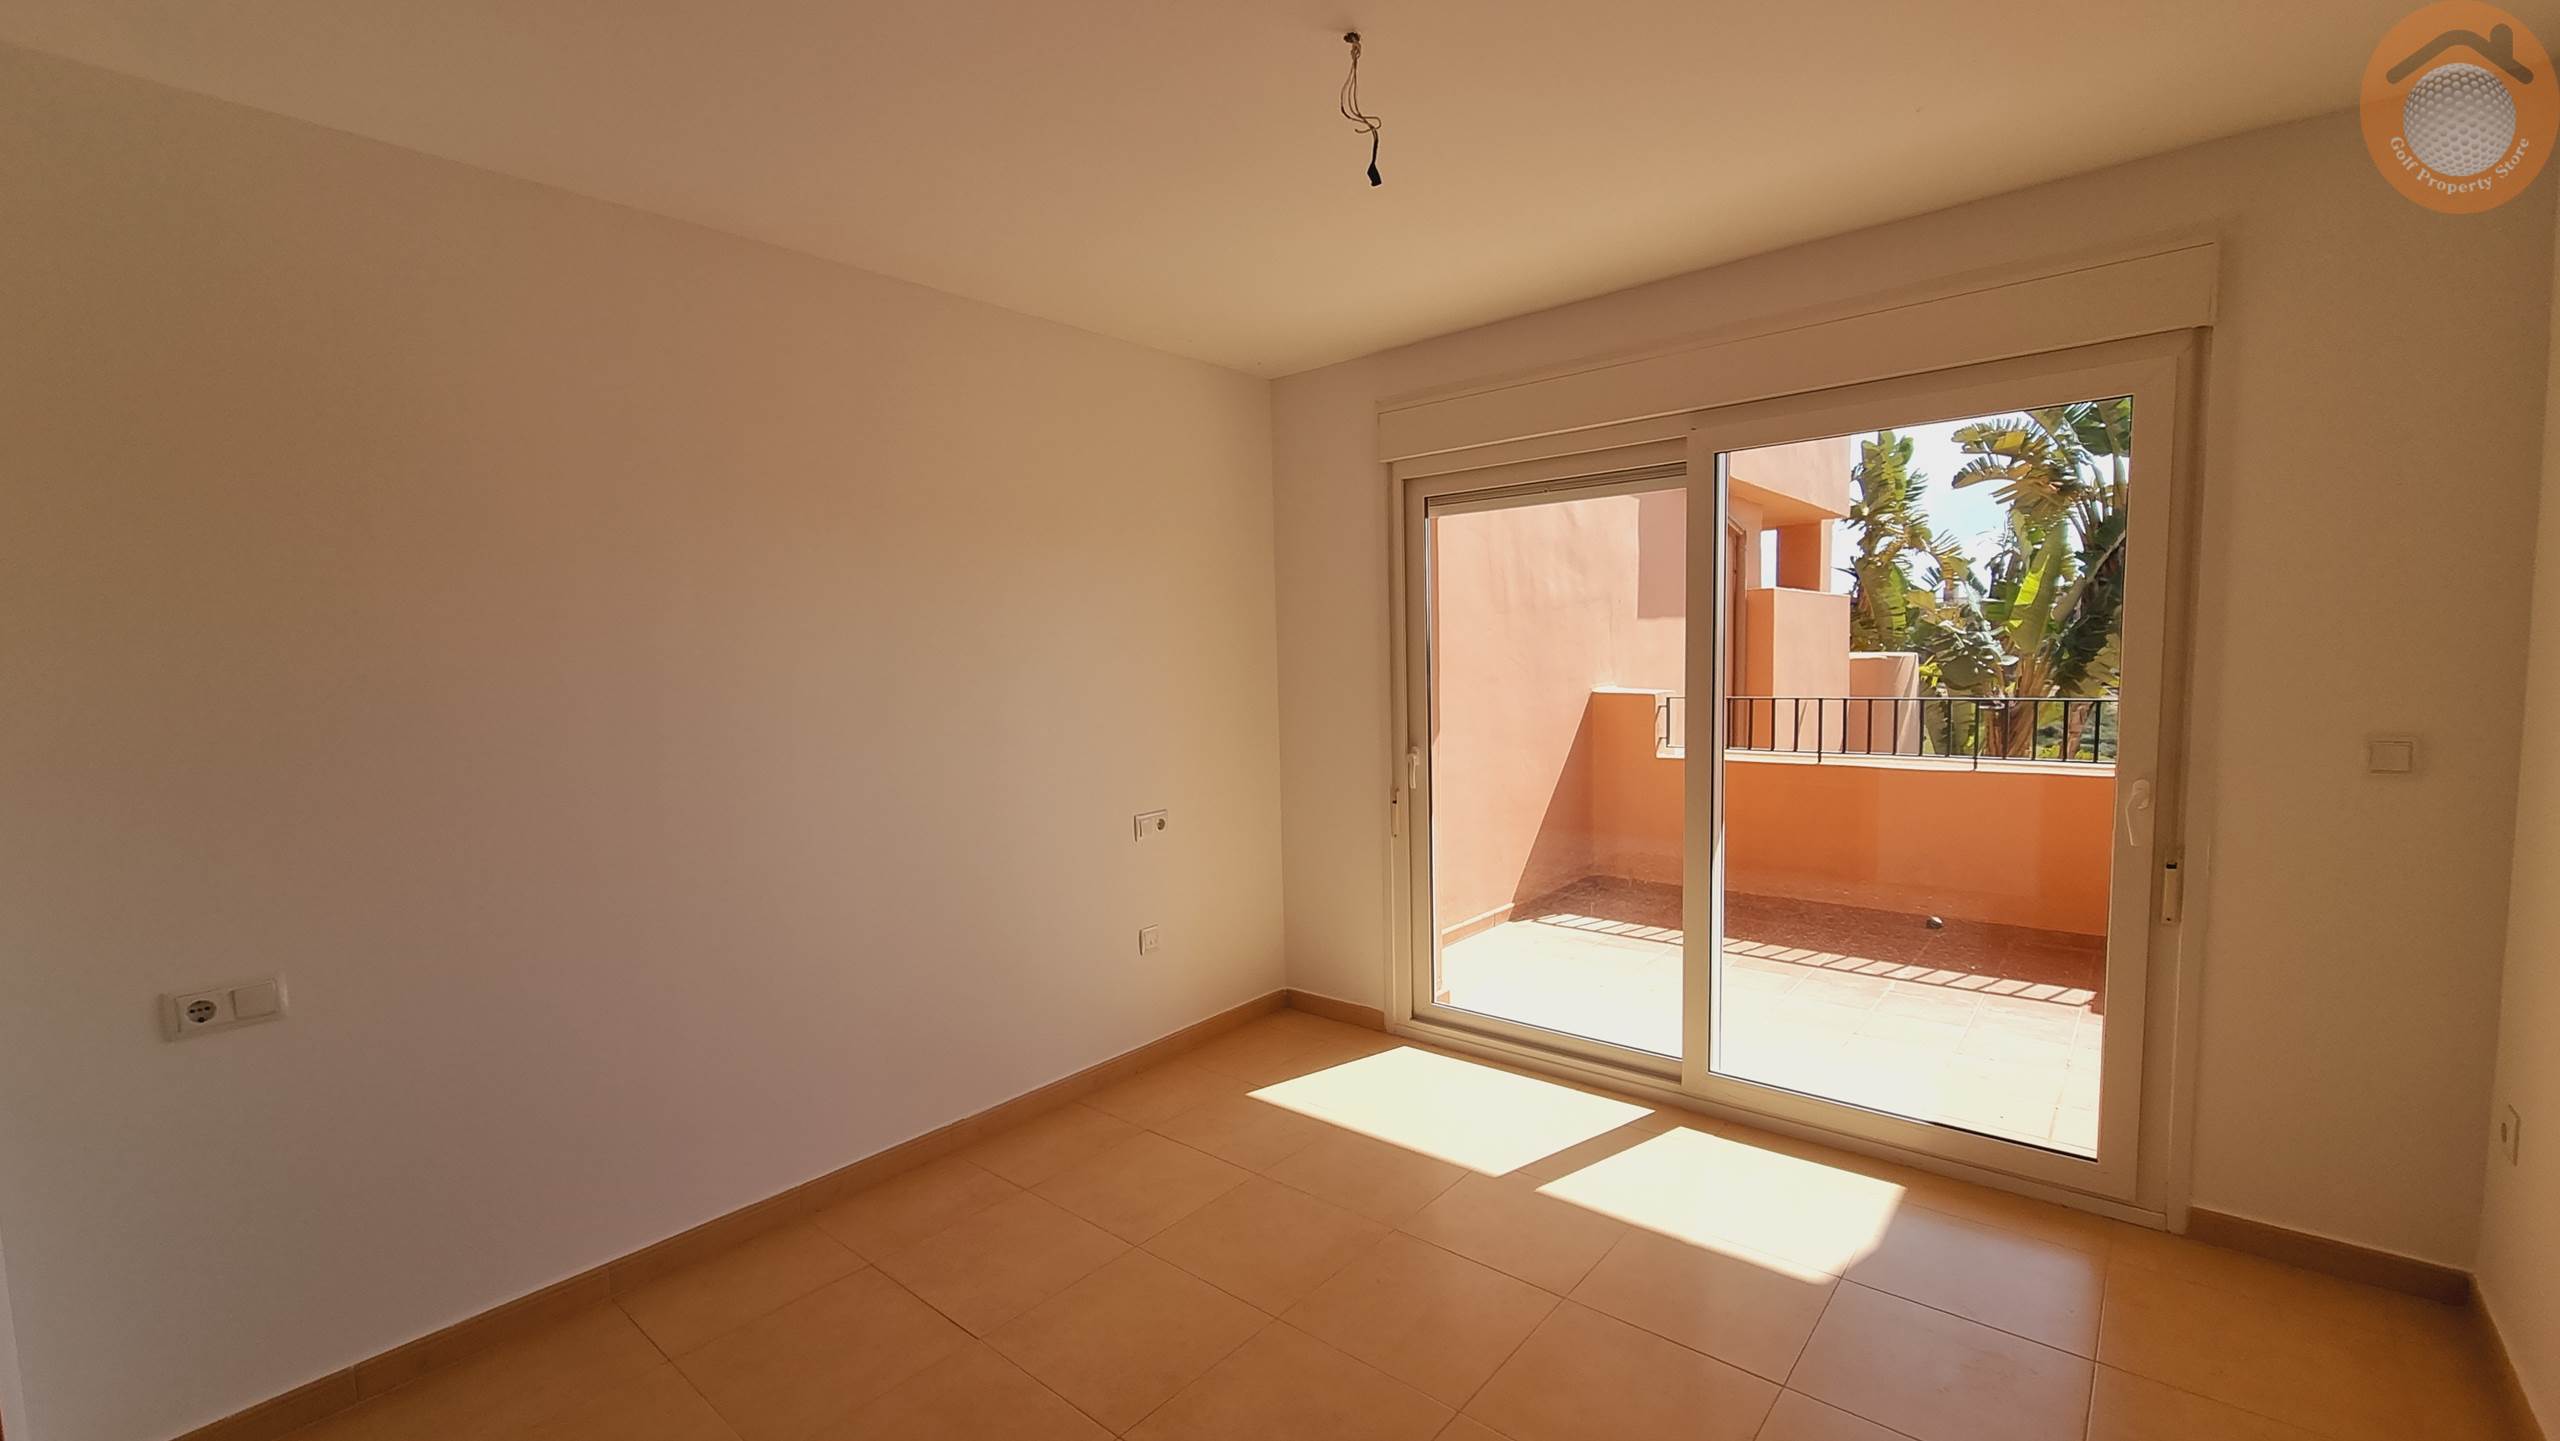 FIRST FLOOR MAR MENOR GOLF RESORT 2 BED 2 BATH APARTMENT WITH LARGE TERRACE FRONTLINE GOLF